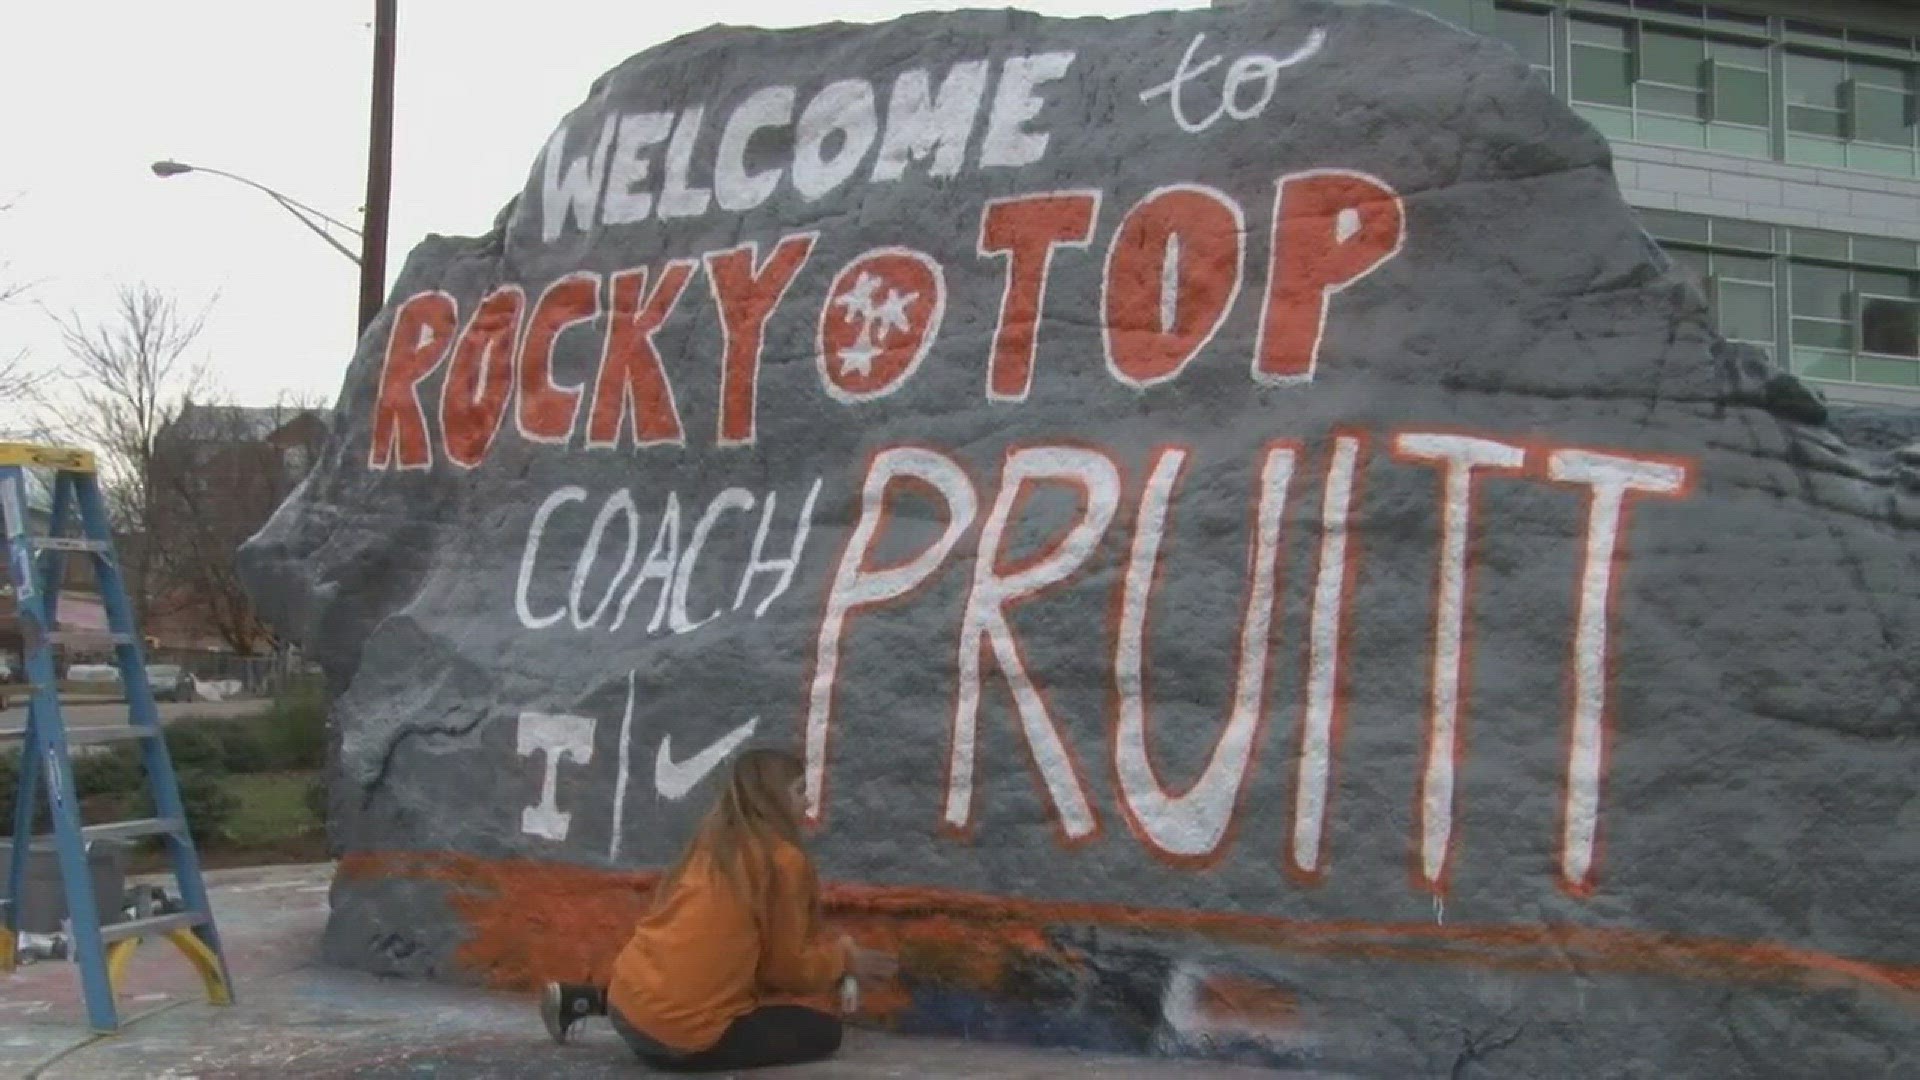 The rock on UT's campus chronicles what students are thinking, and today the painted message welcomed a new football coach.